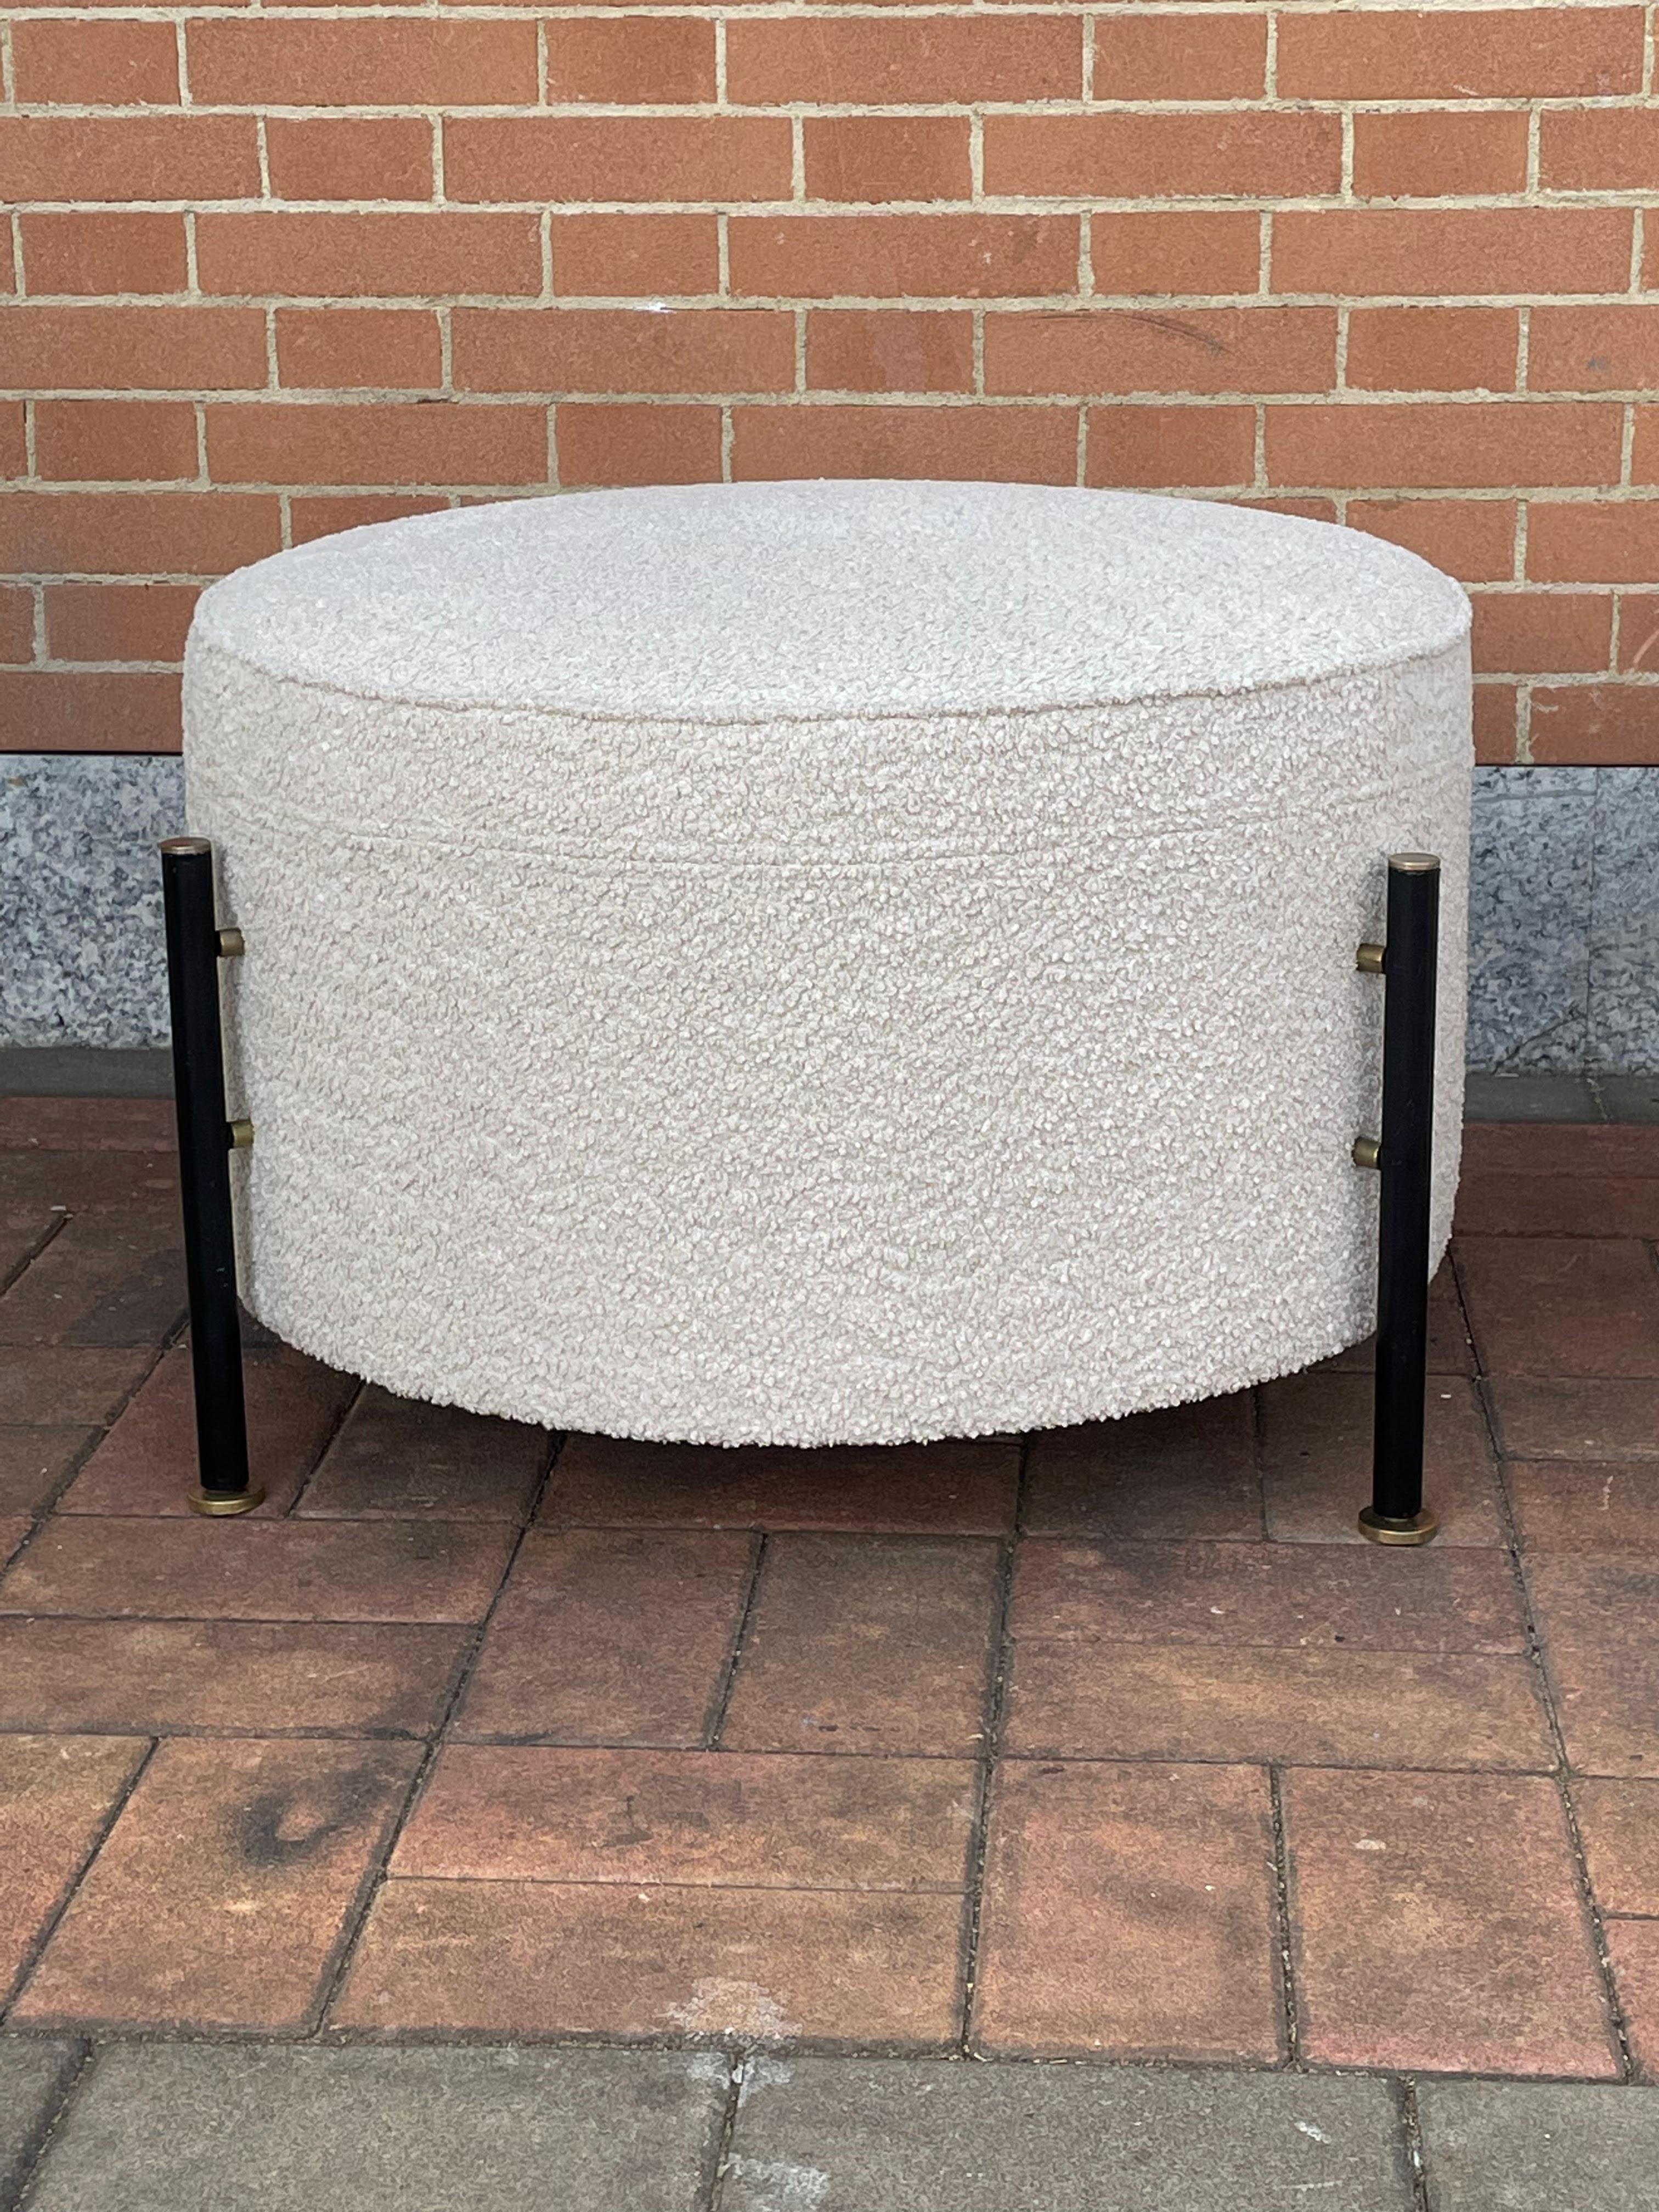 Pair of two large 1960s poufs with a diameter of 70 cm.
They are perfect for an entrance or a living area as furnishing elements but if necessary they can be used as additional seats or support bases.
New upholstery in white stain-resistant bouclé